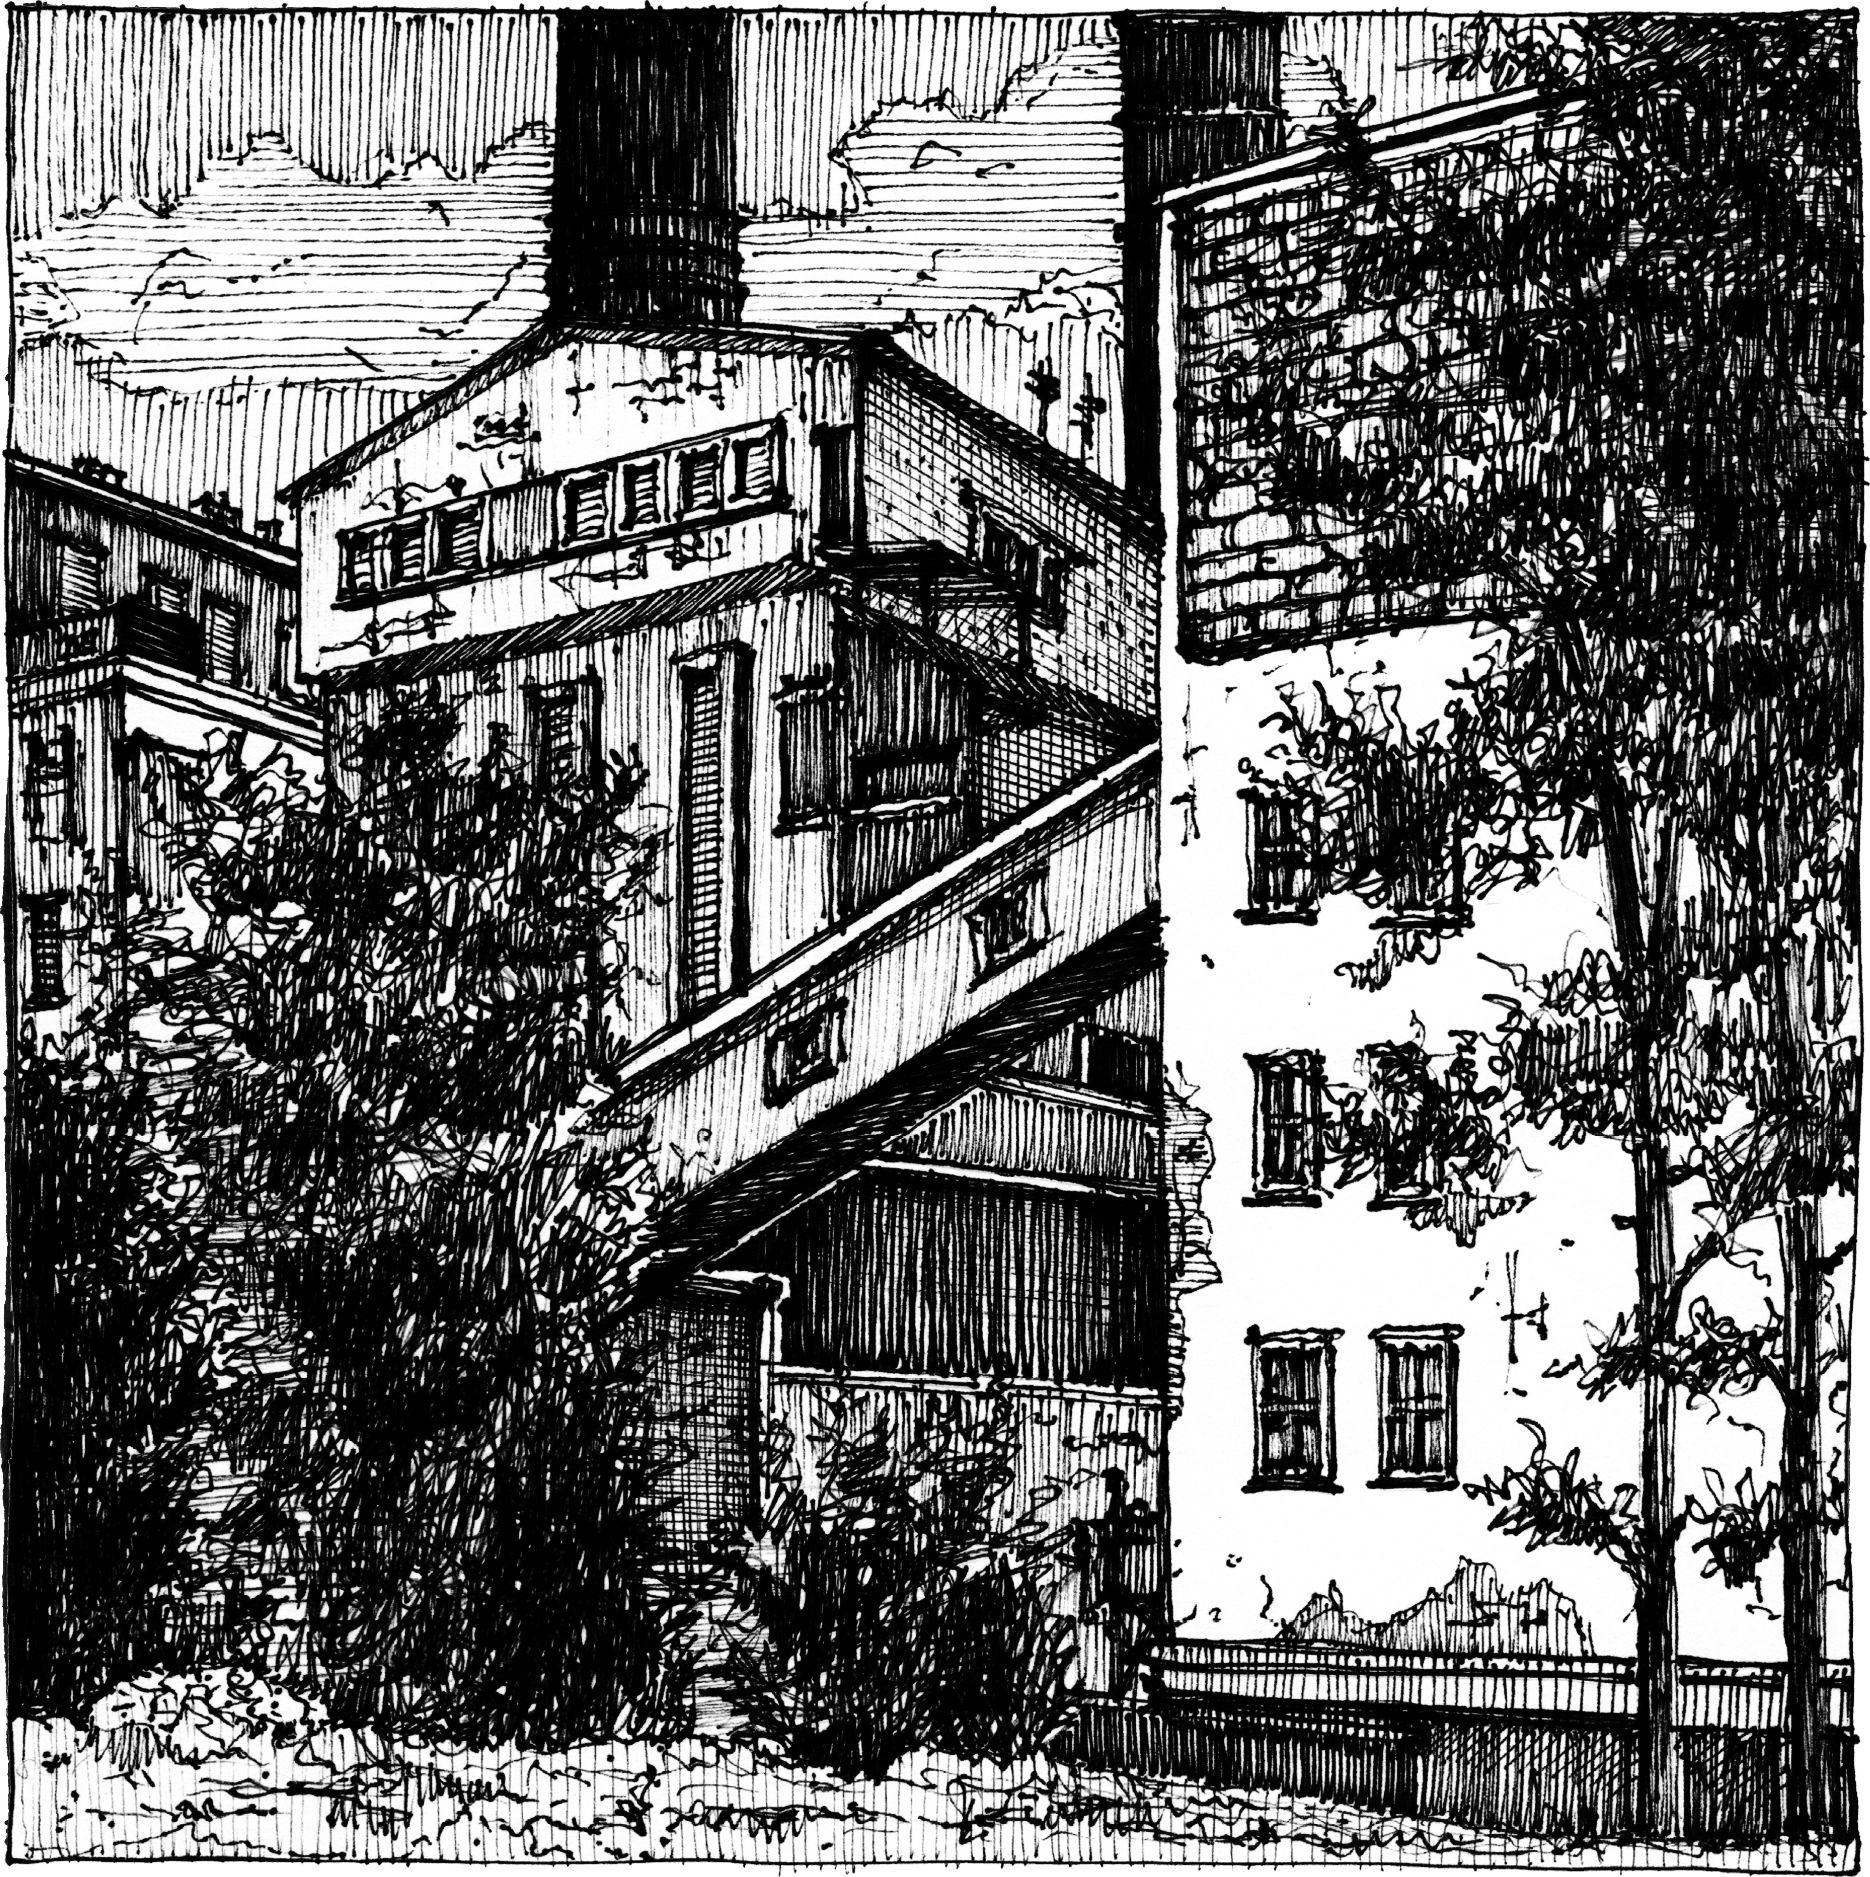 Shale Power Plant - Drawing by Camillo Visini